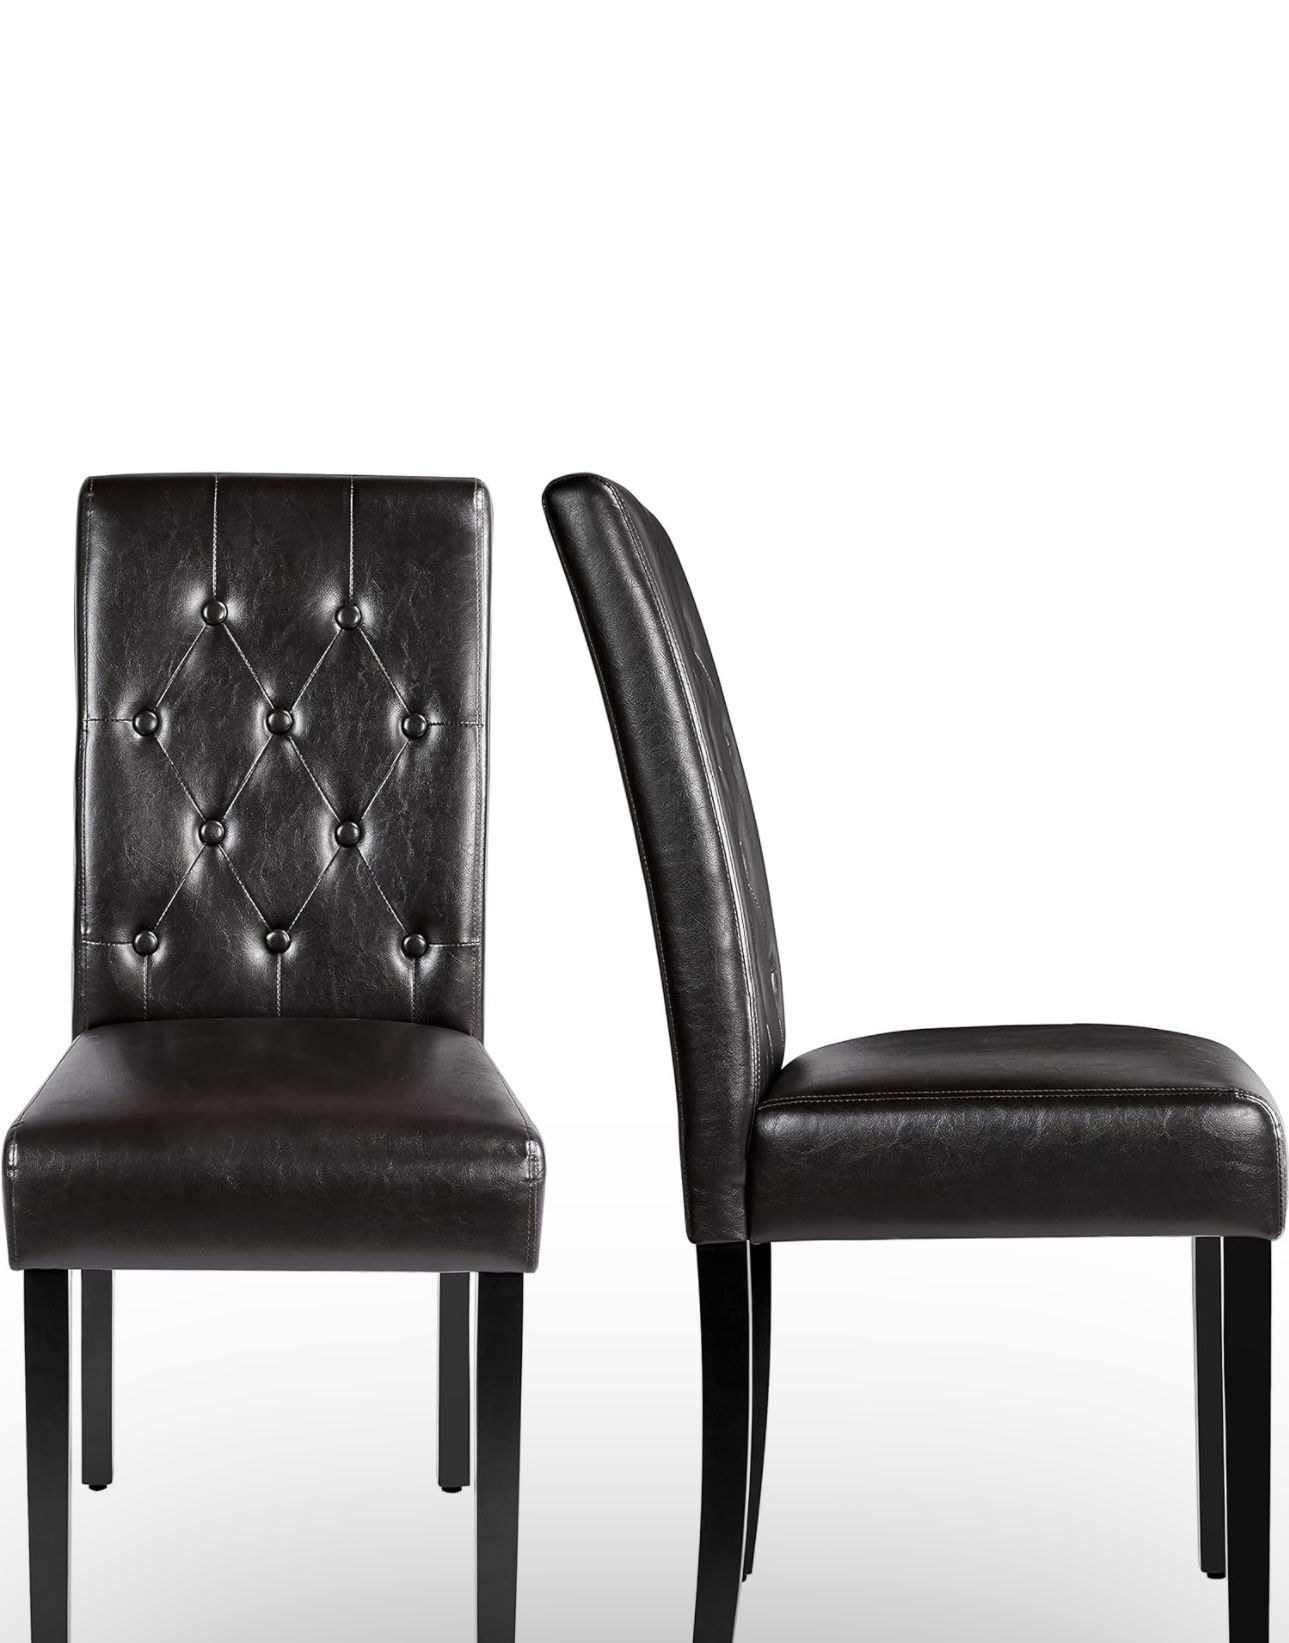 Faux Leather Dining Chairs, Button Tufted Dining Room Chairs with Rubber Wood Legs, Mid-Century Accent Dinner Chair for Living Room/Kitchen, Set of 2,